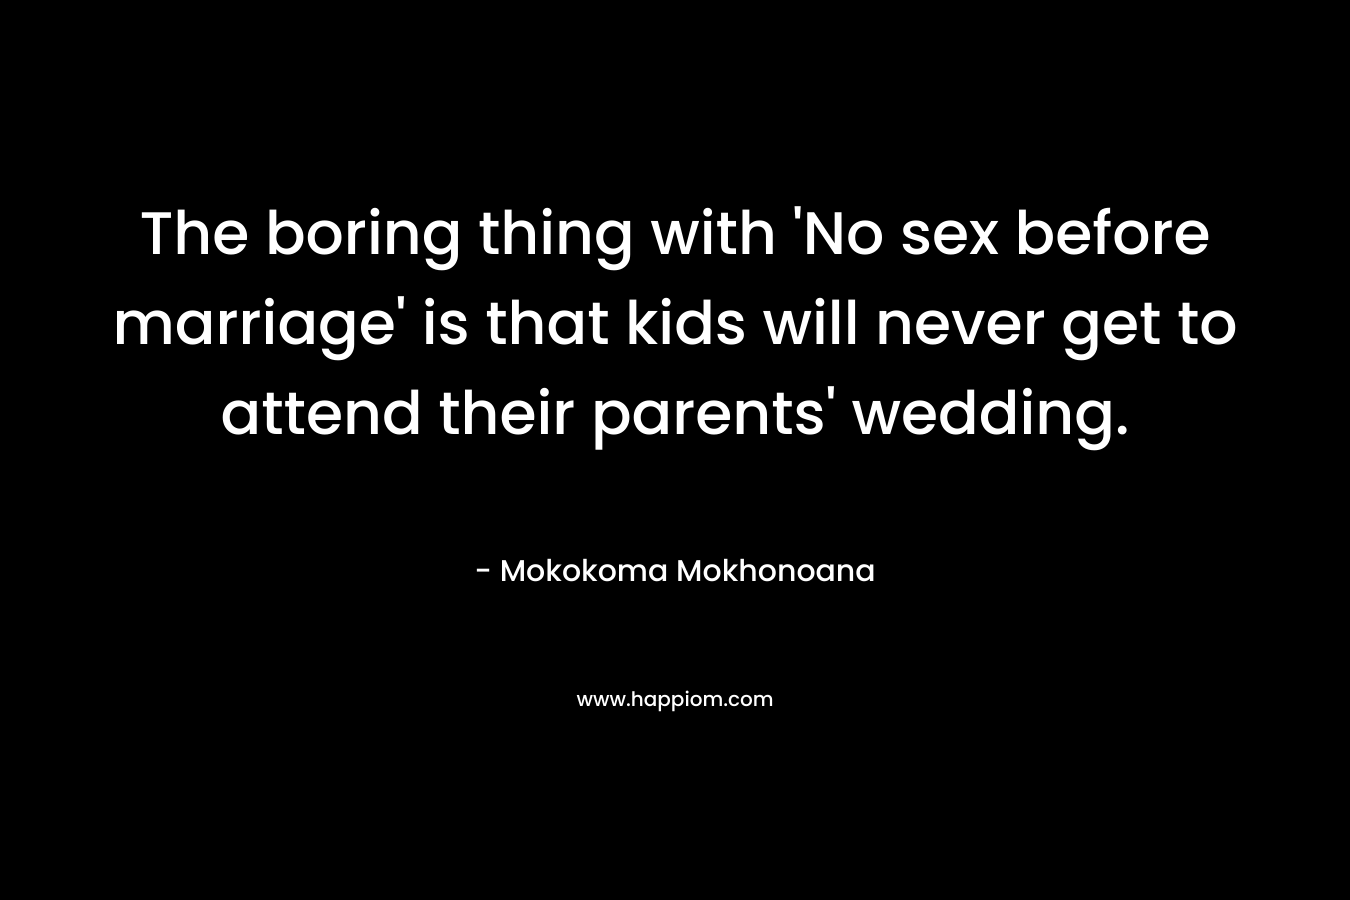 The boring thing with 'No sex before marriage' is that kids will never get to attend their parents' wedding.